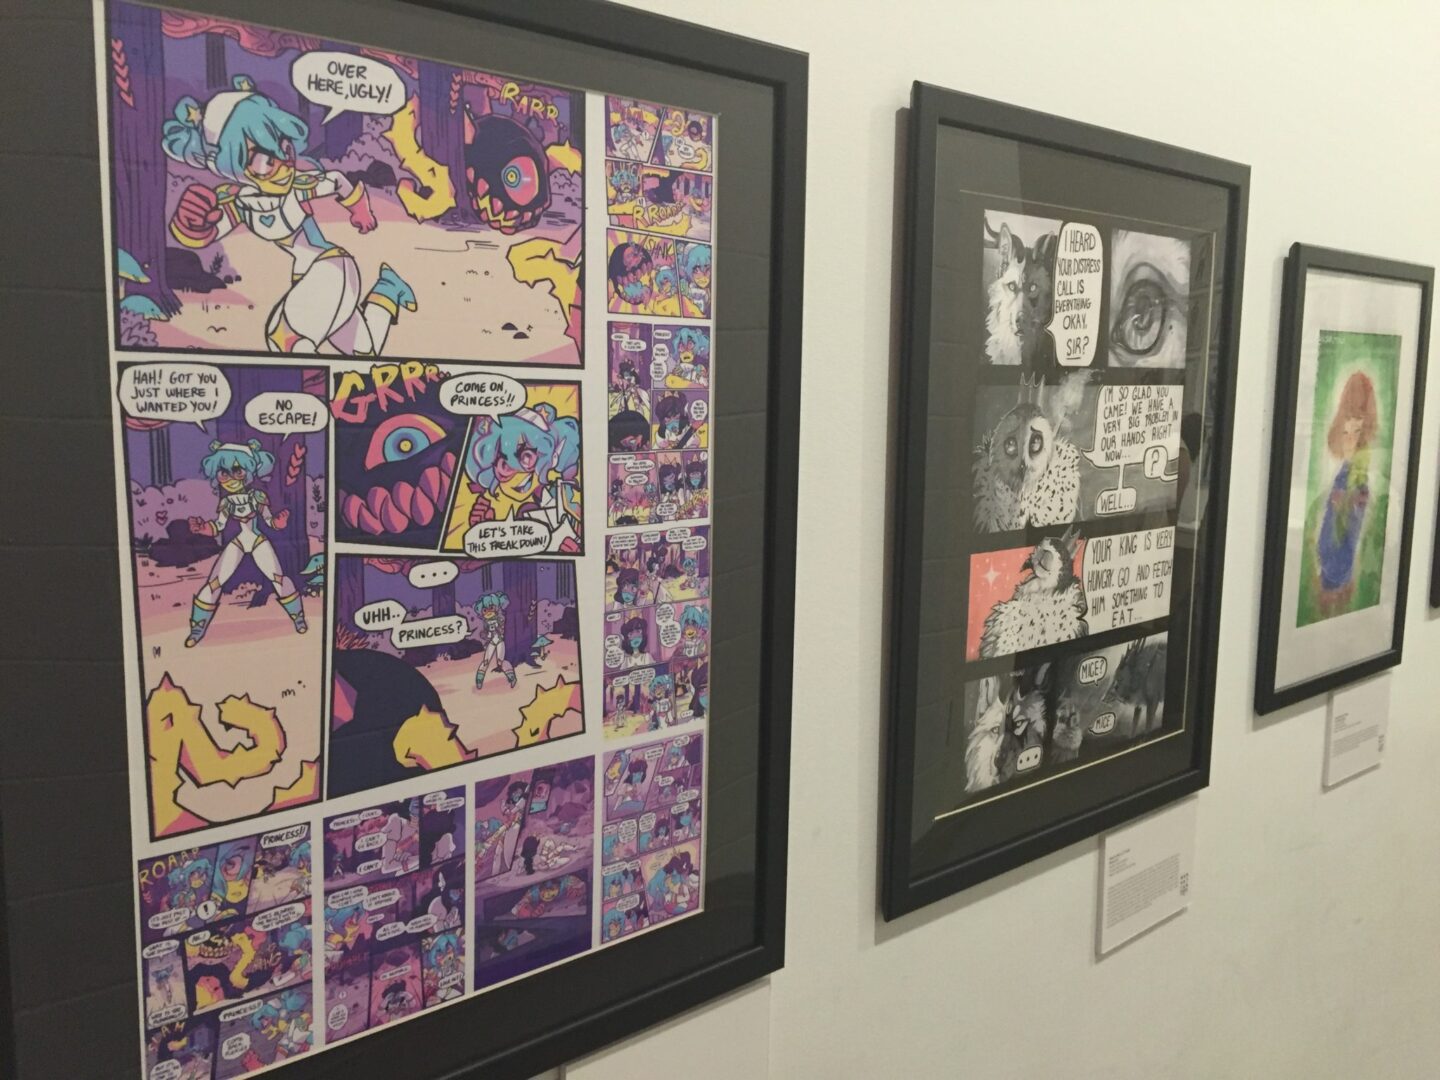 Framed comic strips on display in an art gallery.